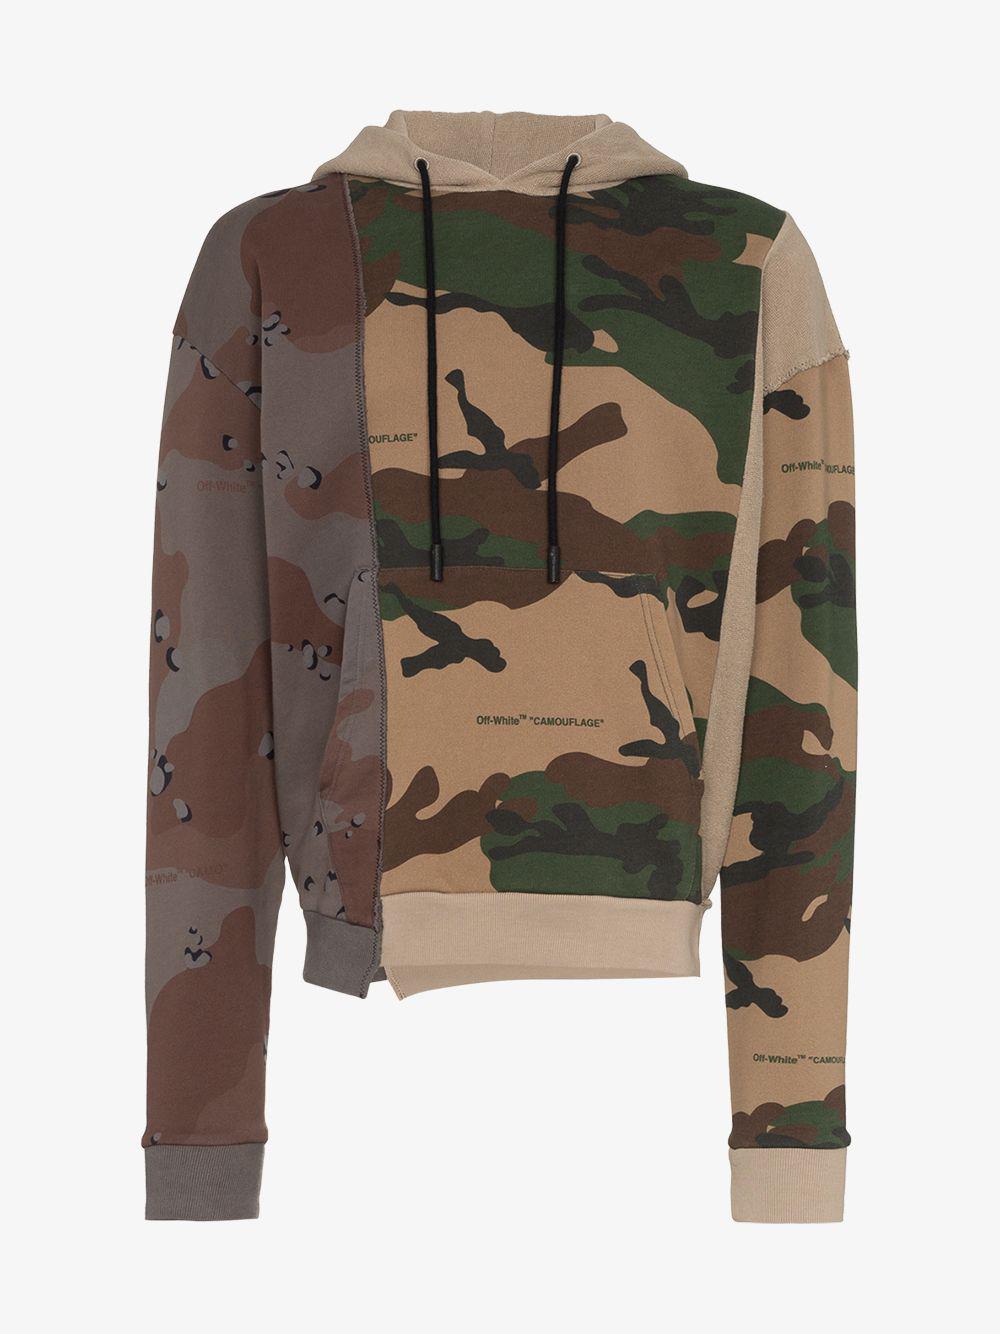 Off-White c/o Virgil Abloh Cotton Panelled Camouflage Hooded Sweatshirt for  Men - Lyst